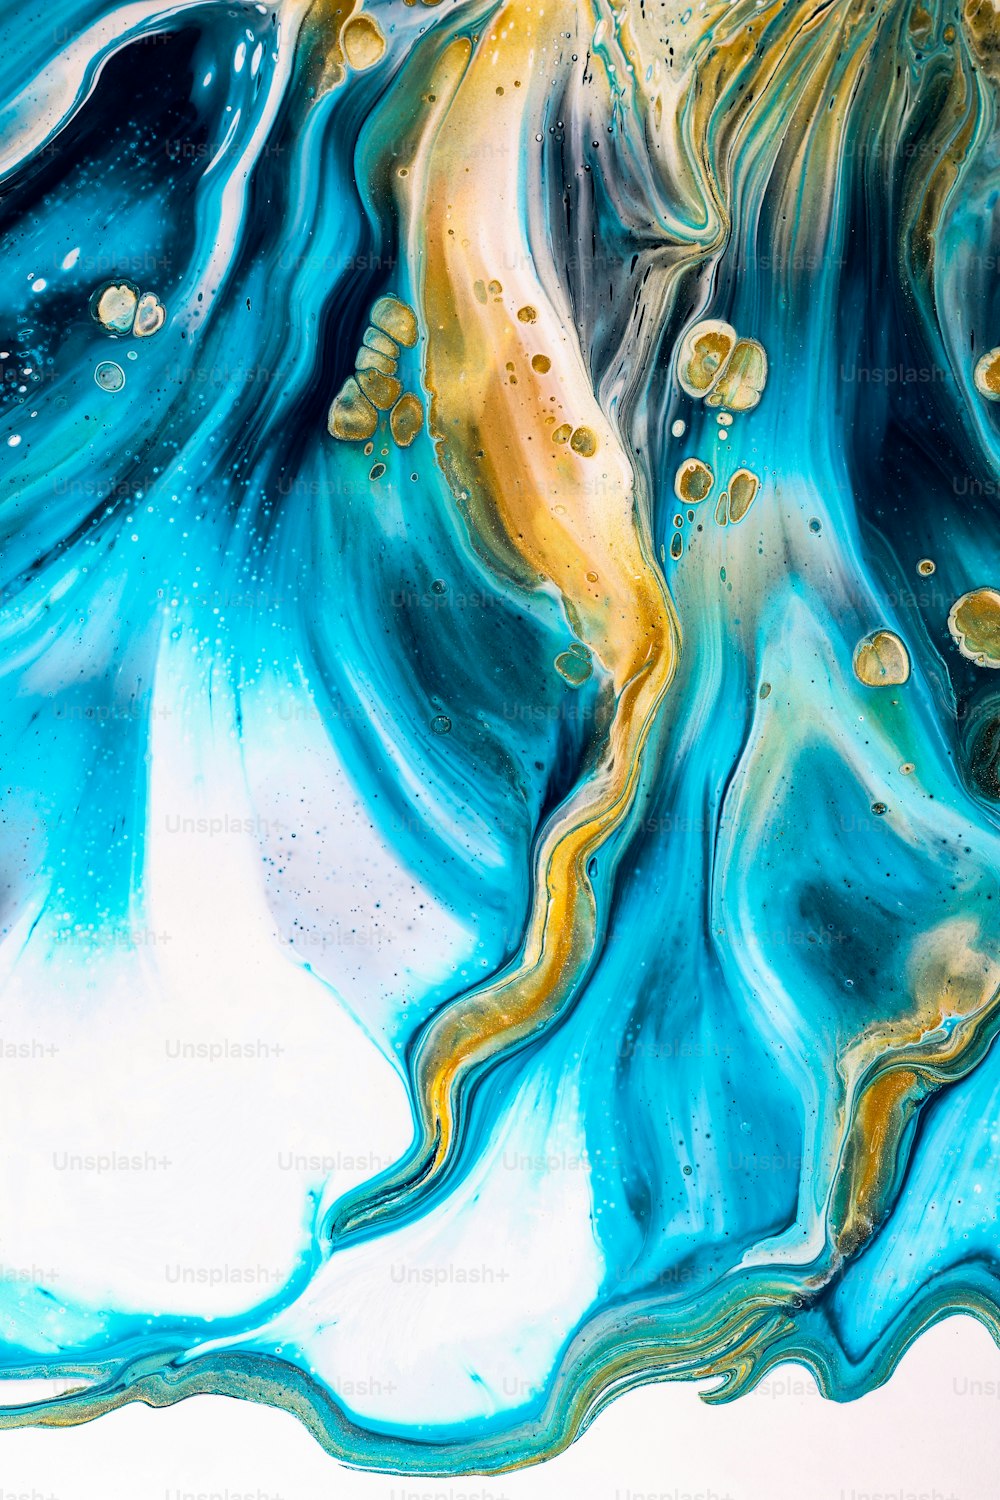 a painting of blue, yellow and white swirls